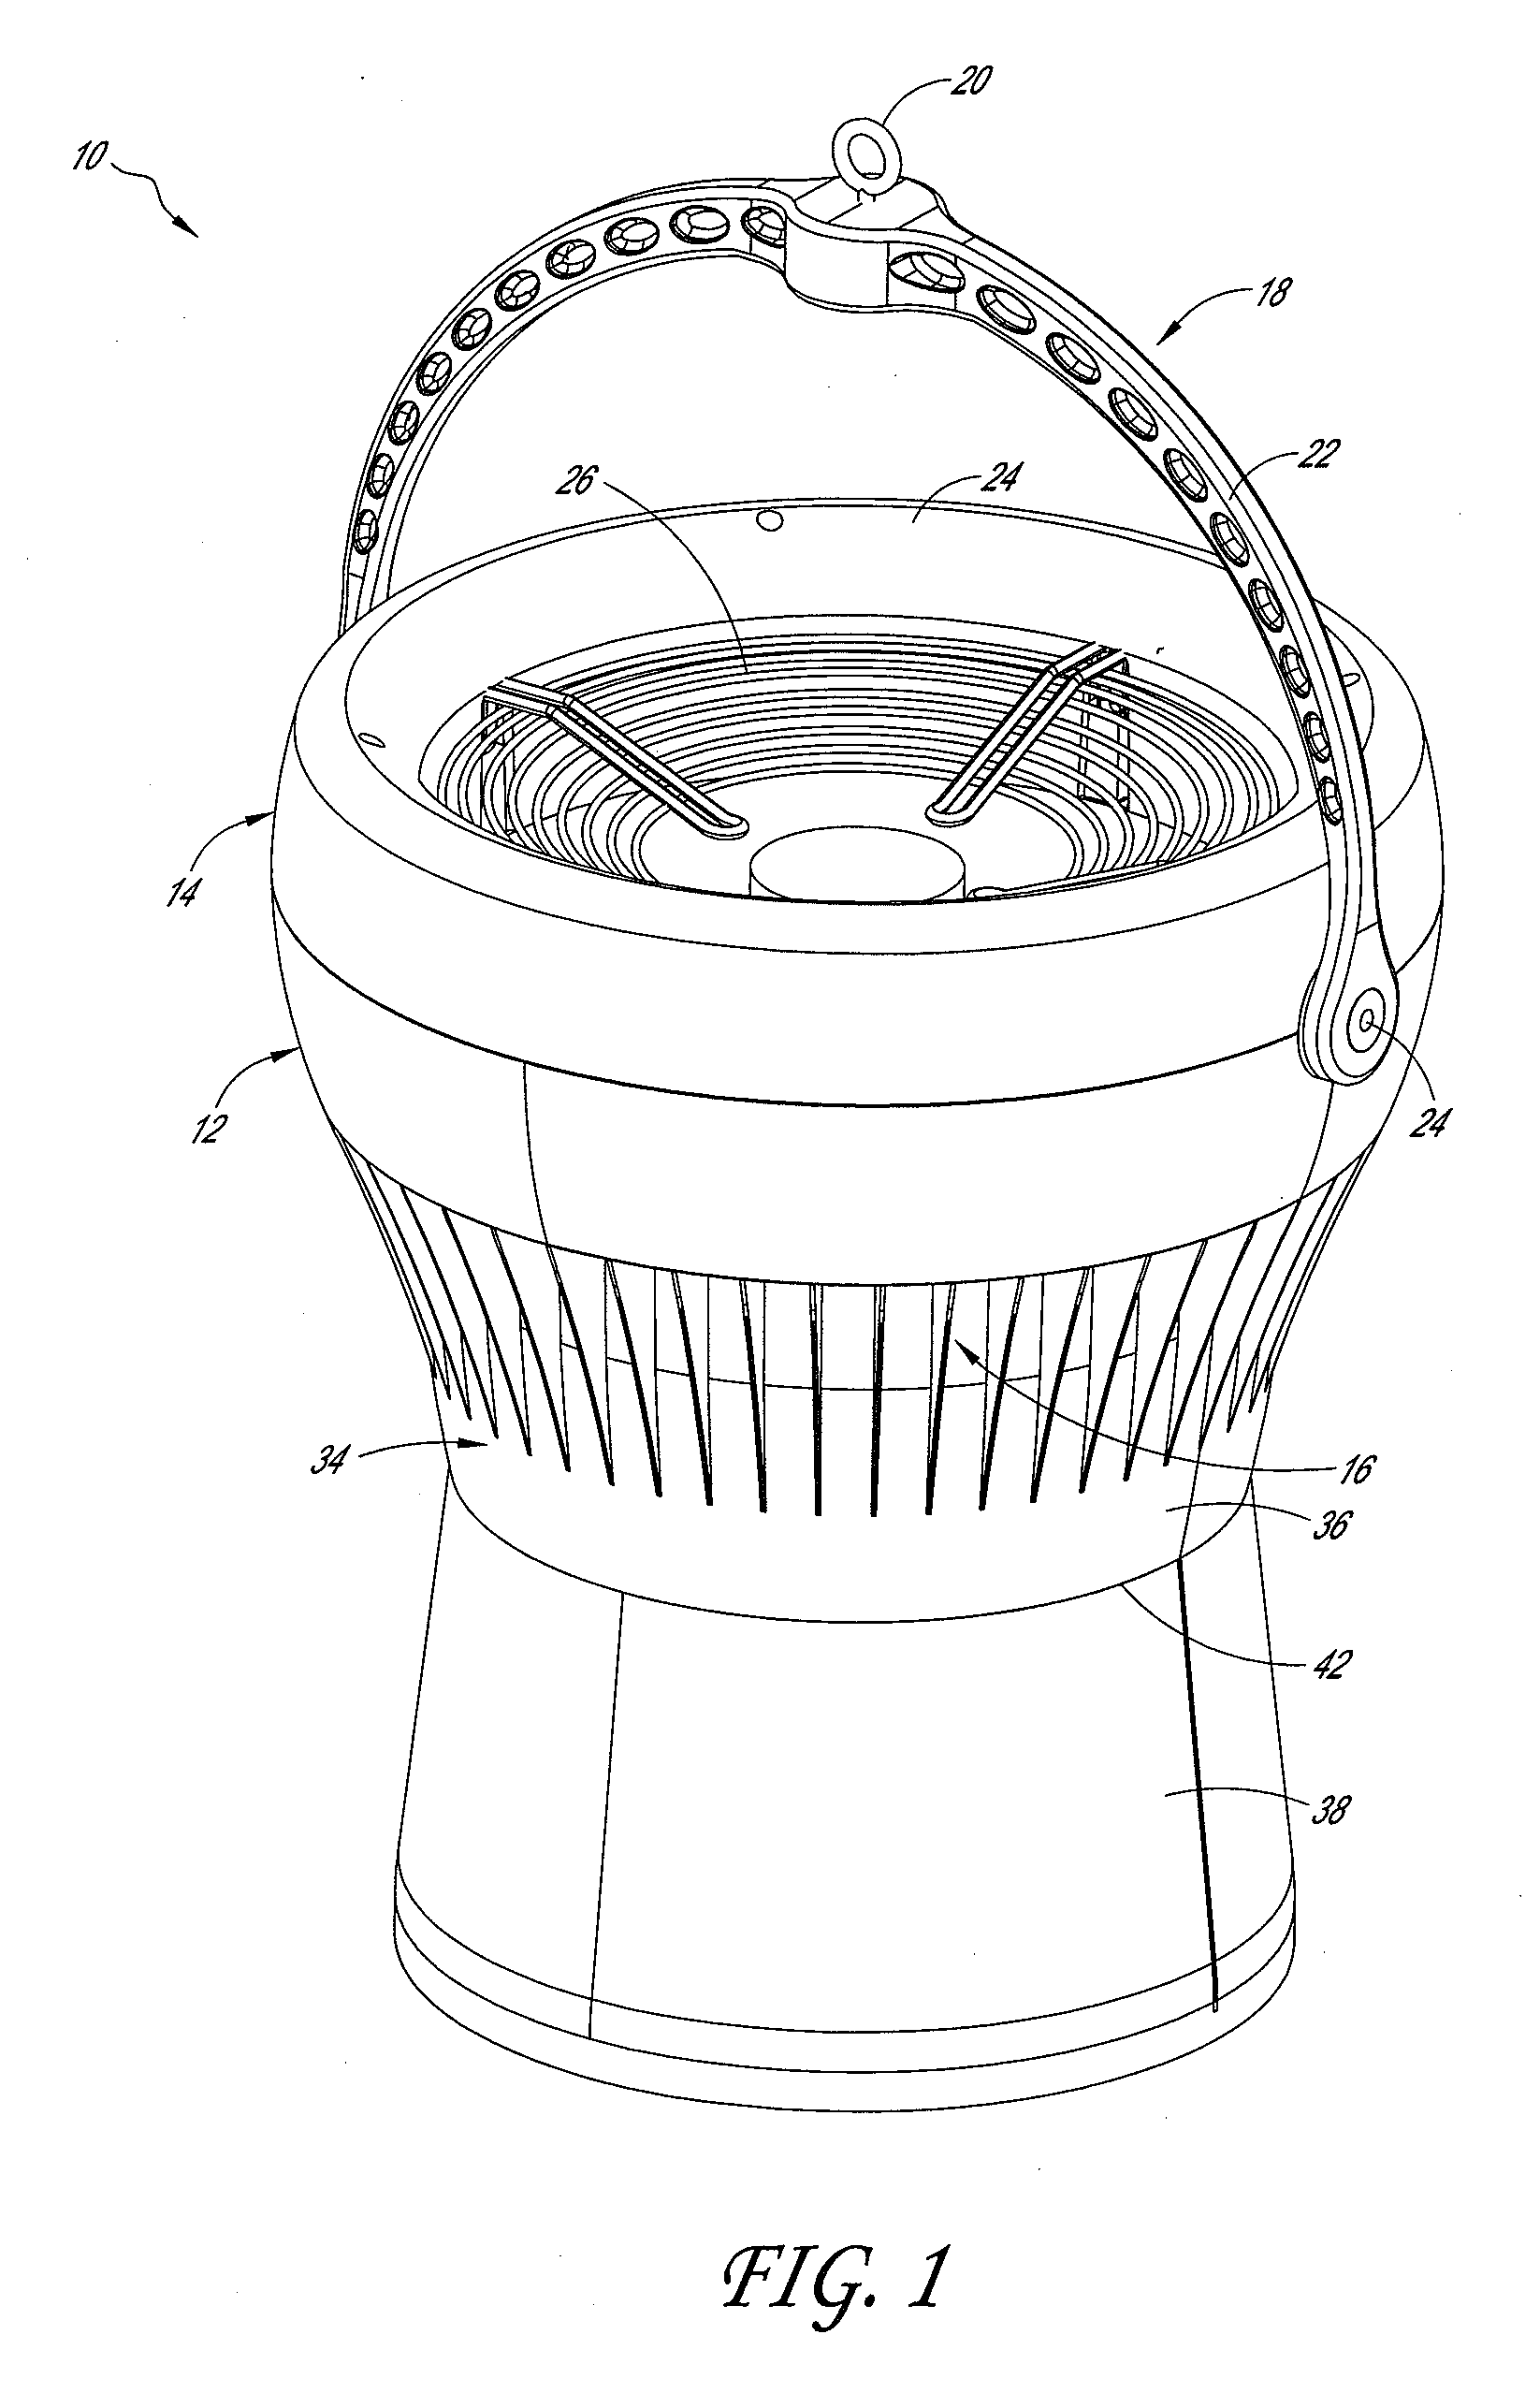 Columnar air moving devices, systems and methods